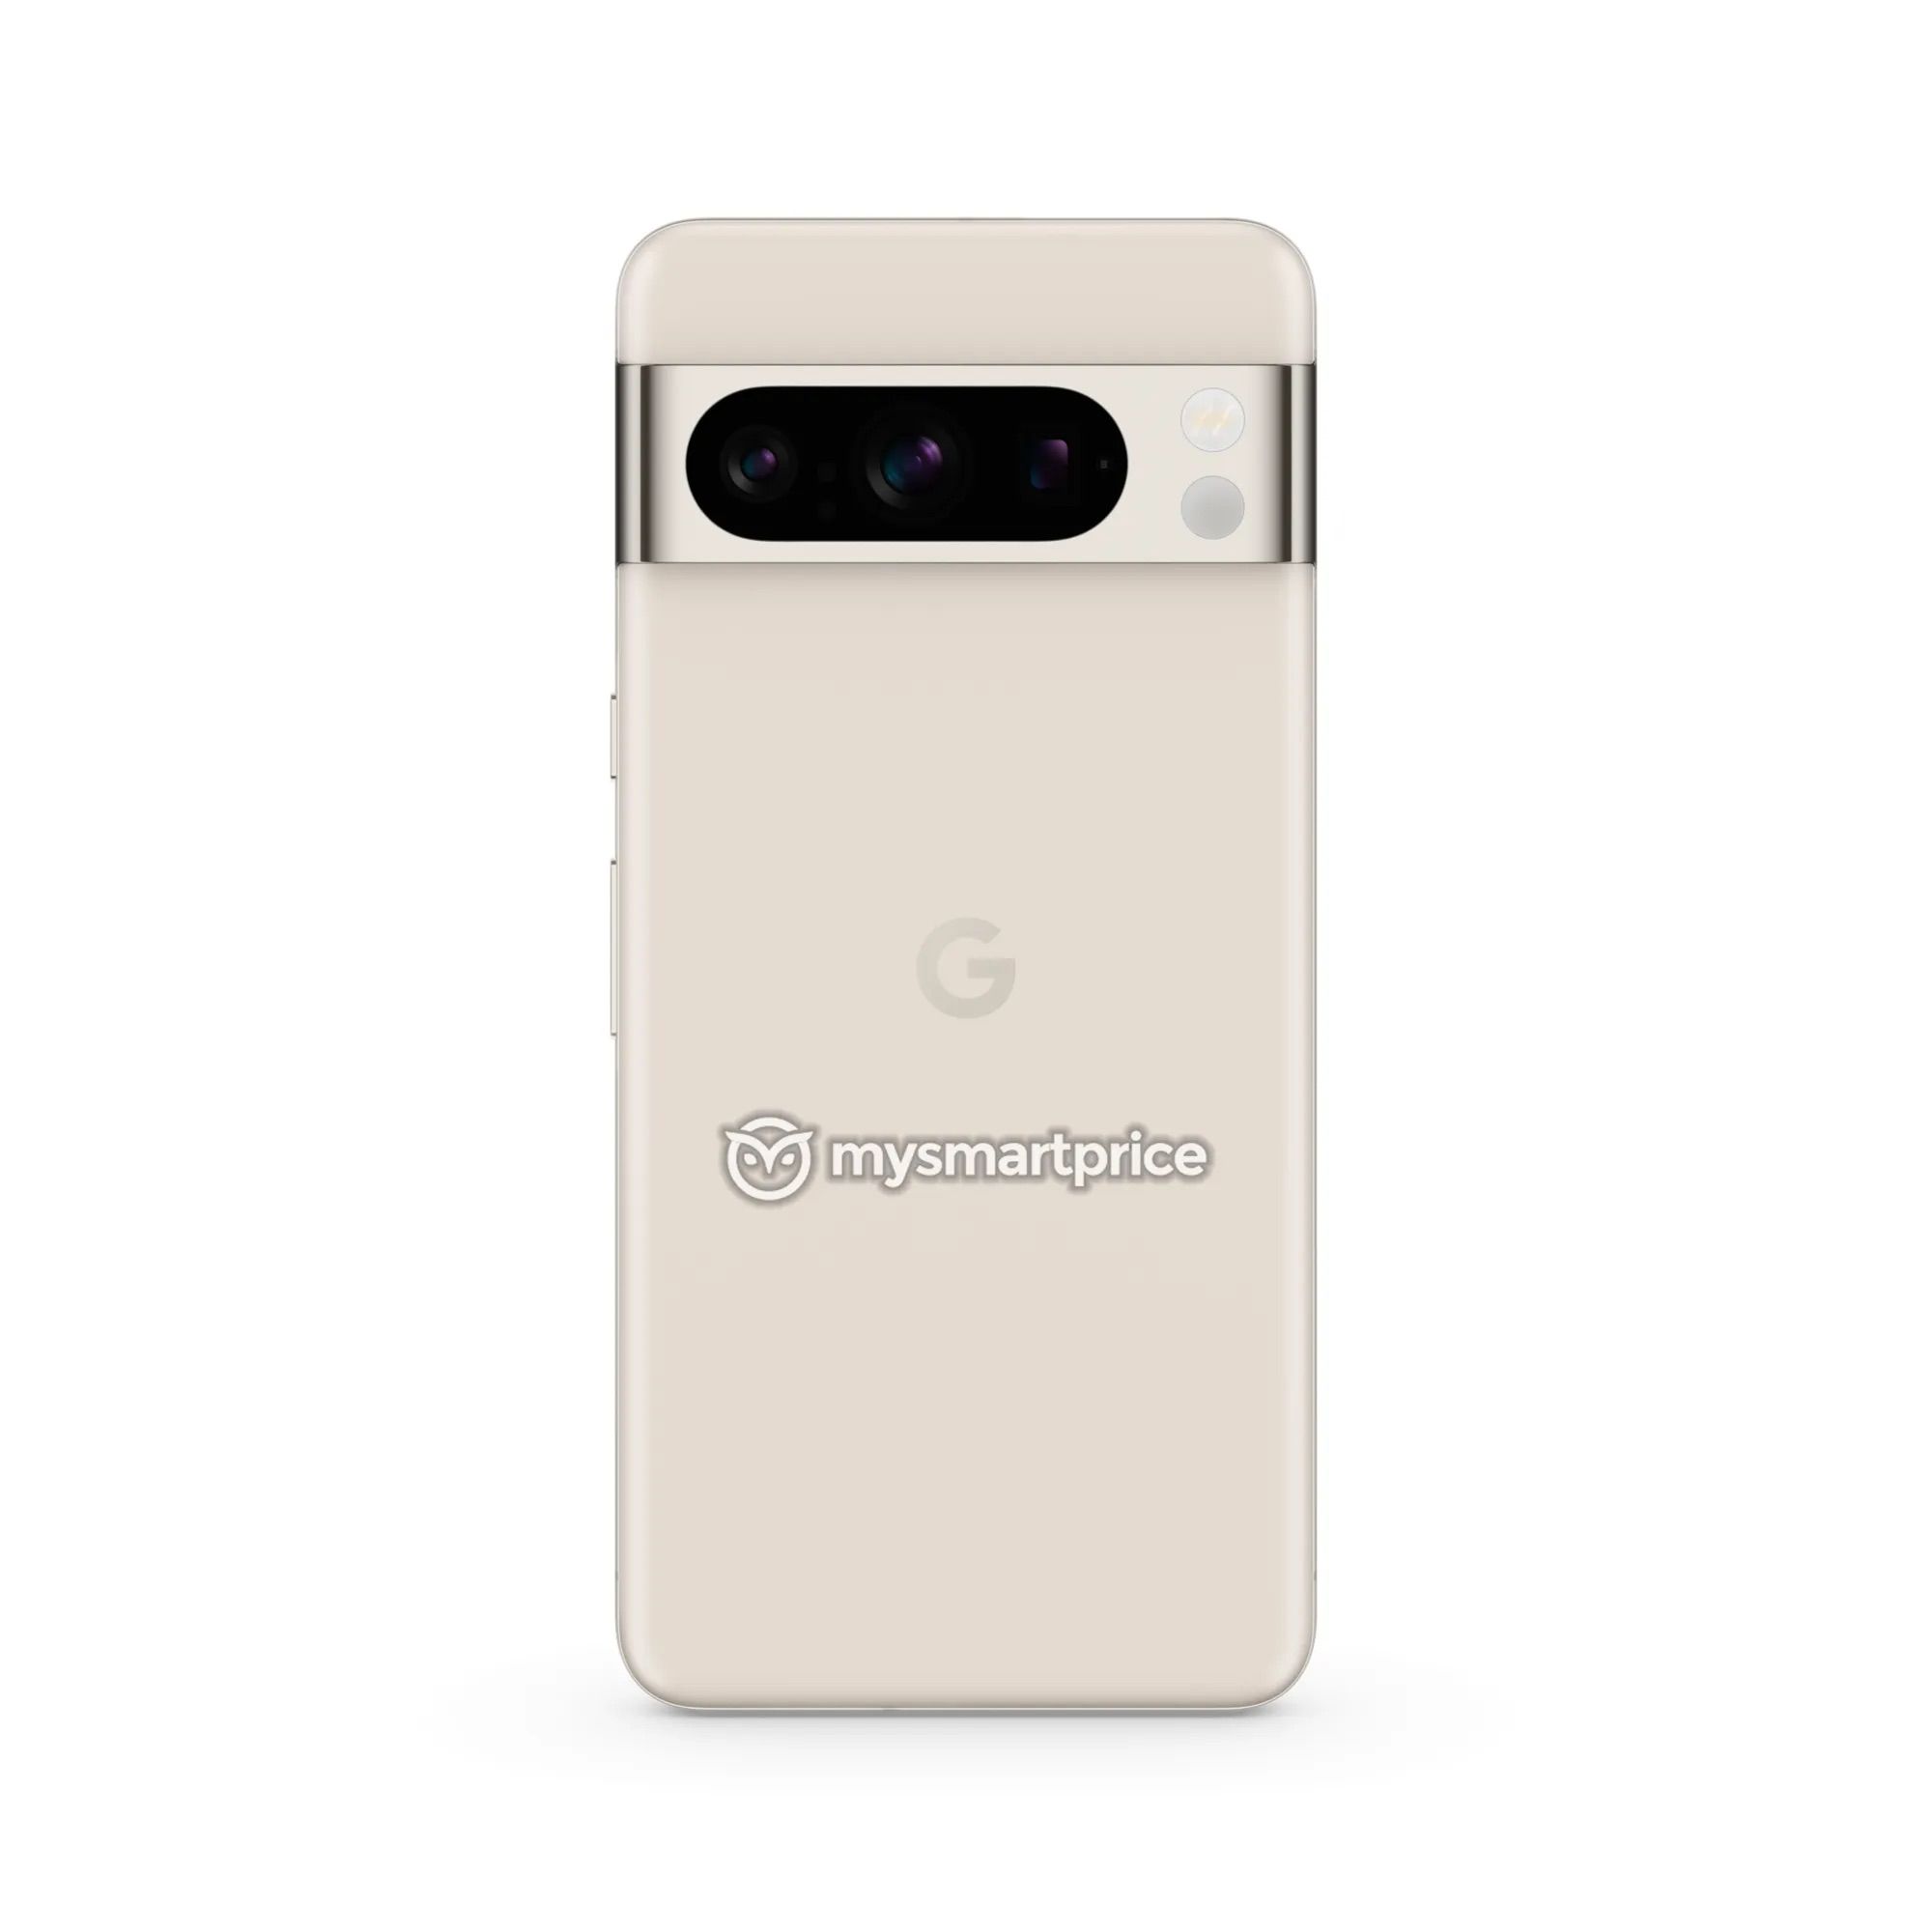 Google Pixel 8 series colour options revealed ahead of launch